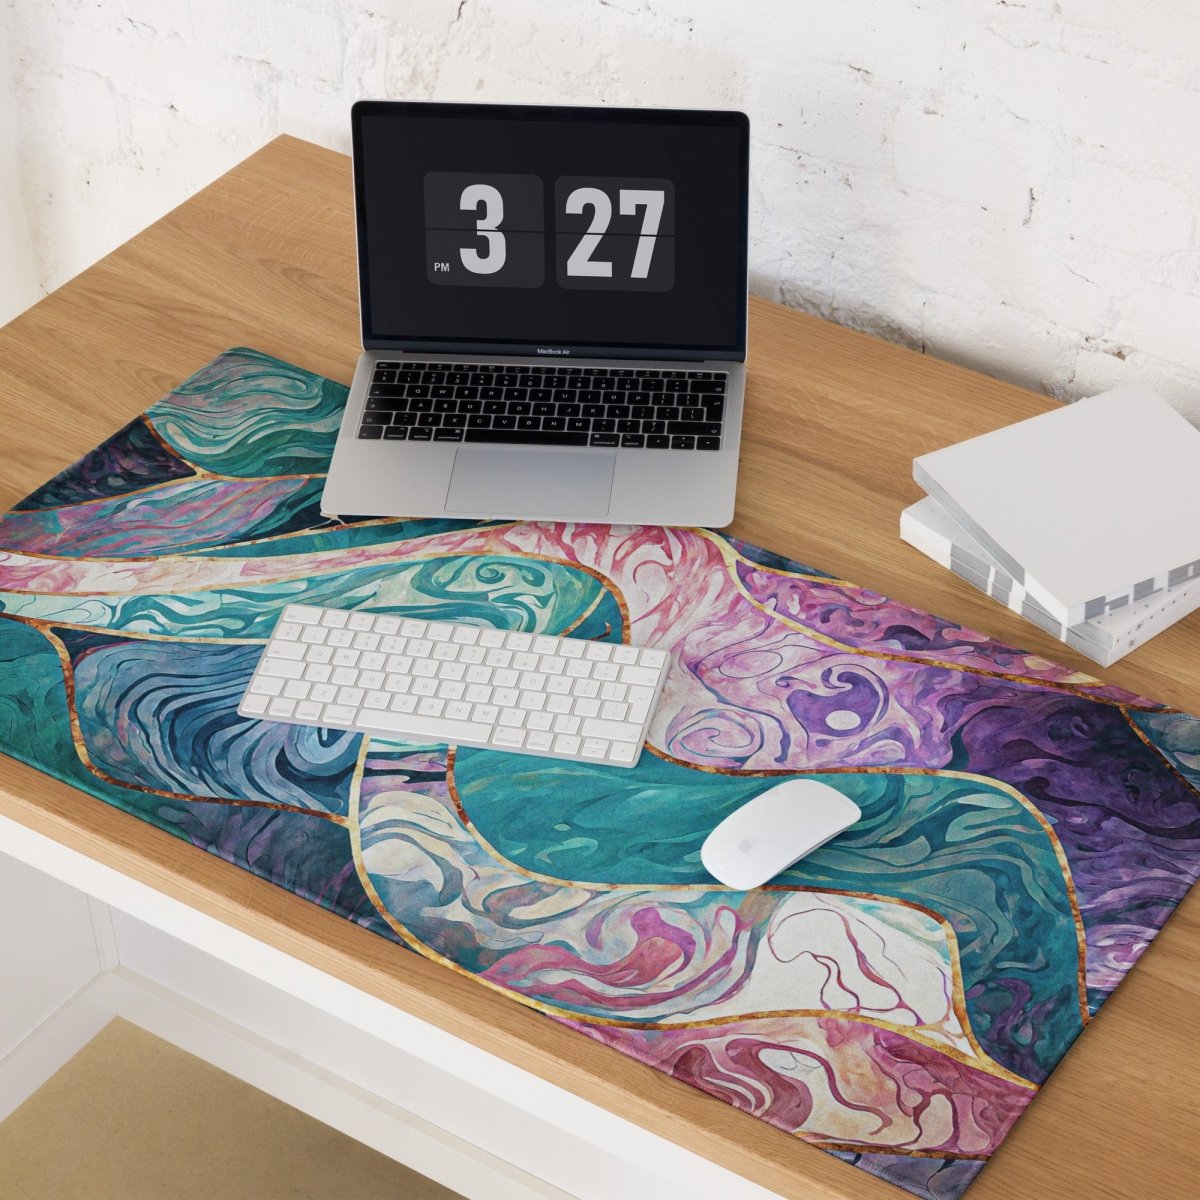 Dragon abstraction - Gaming mouse pad - Ever colorful